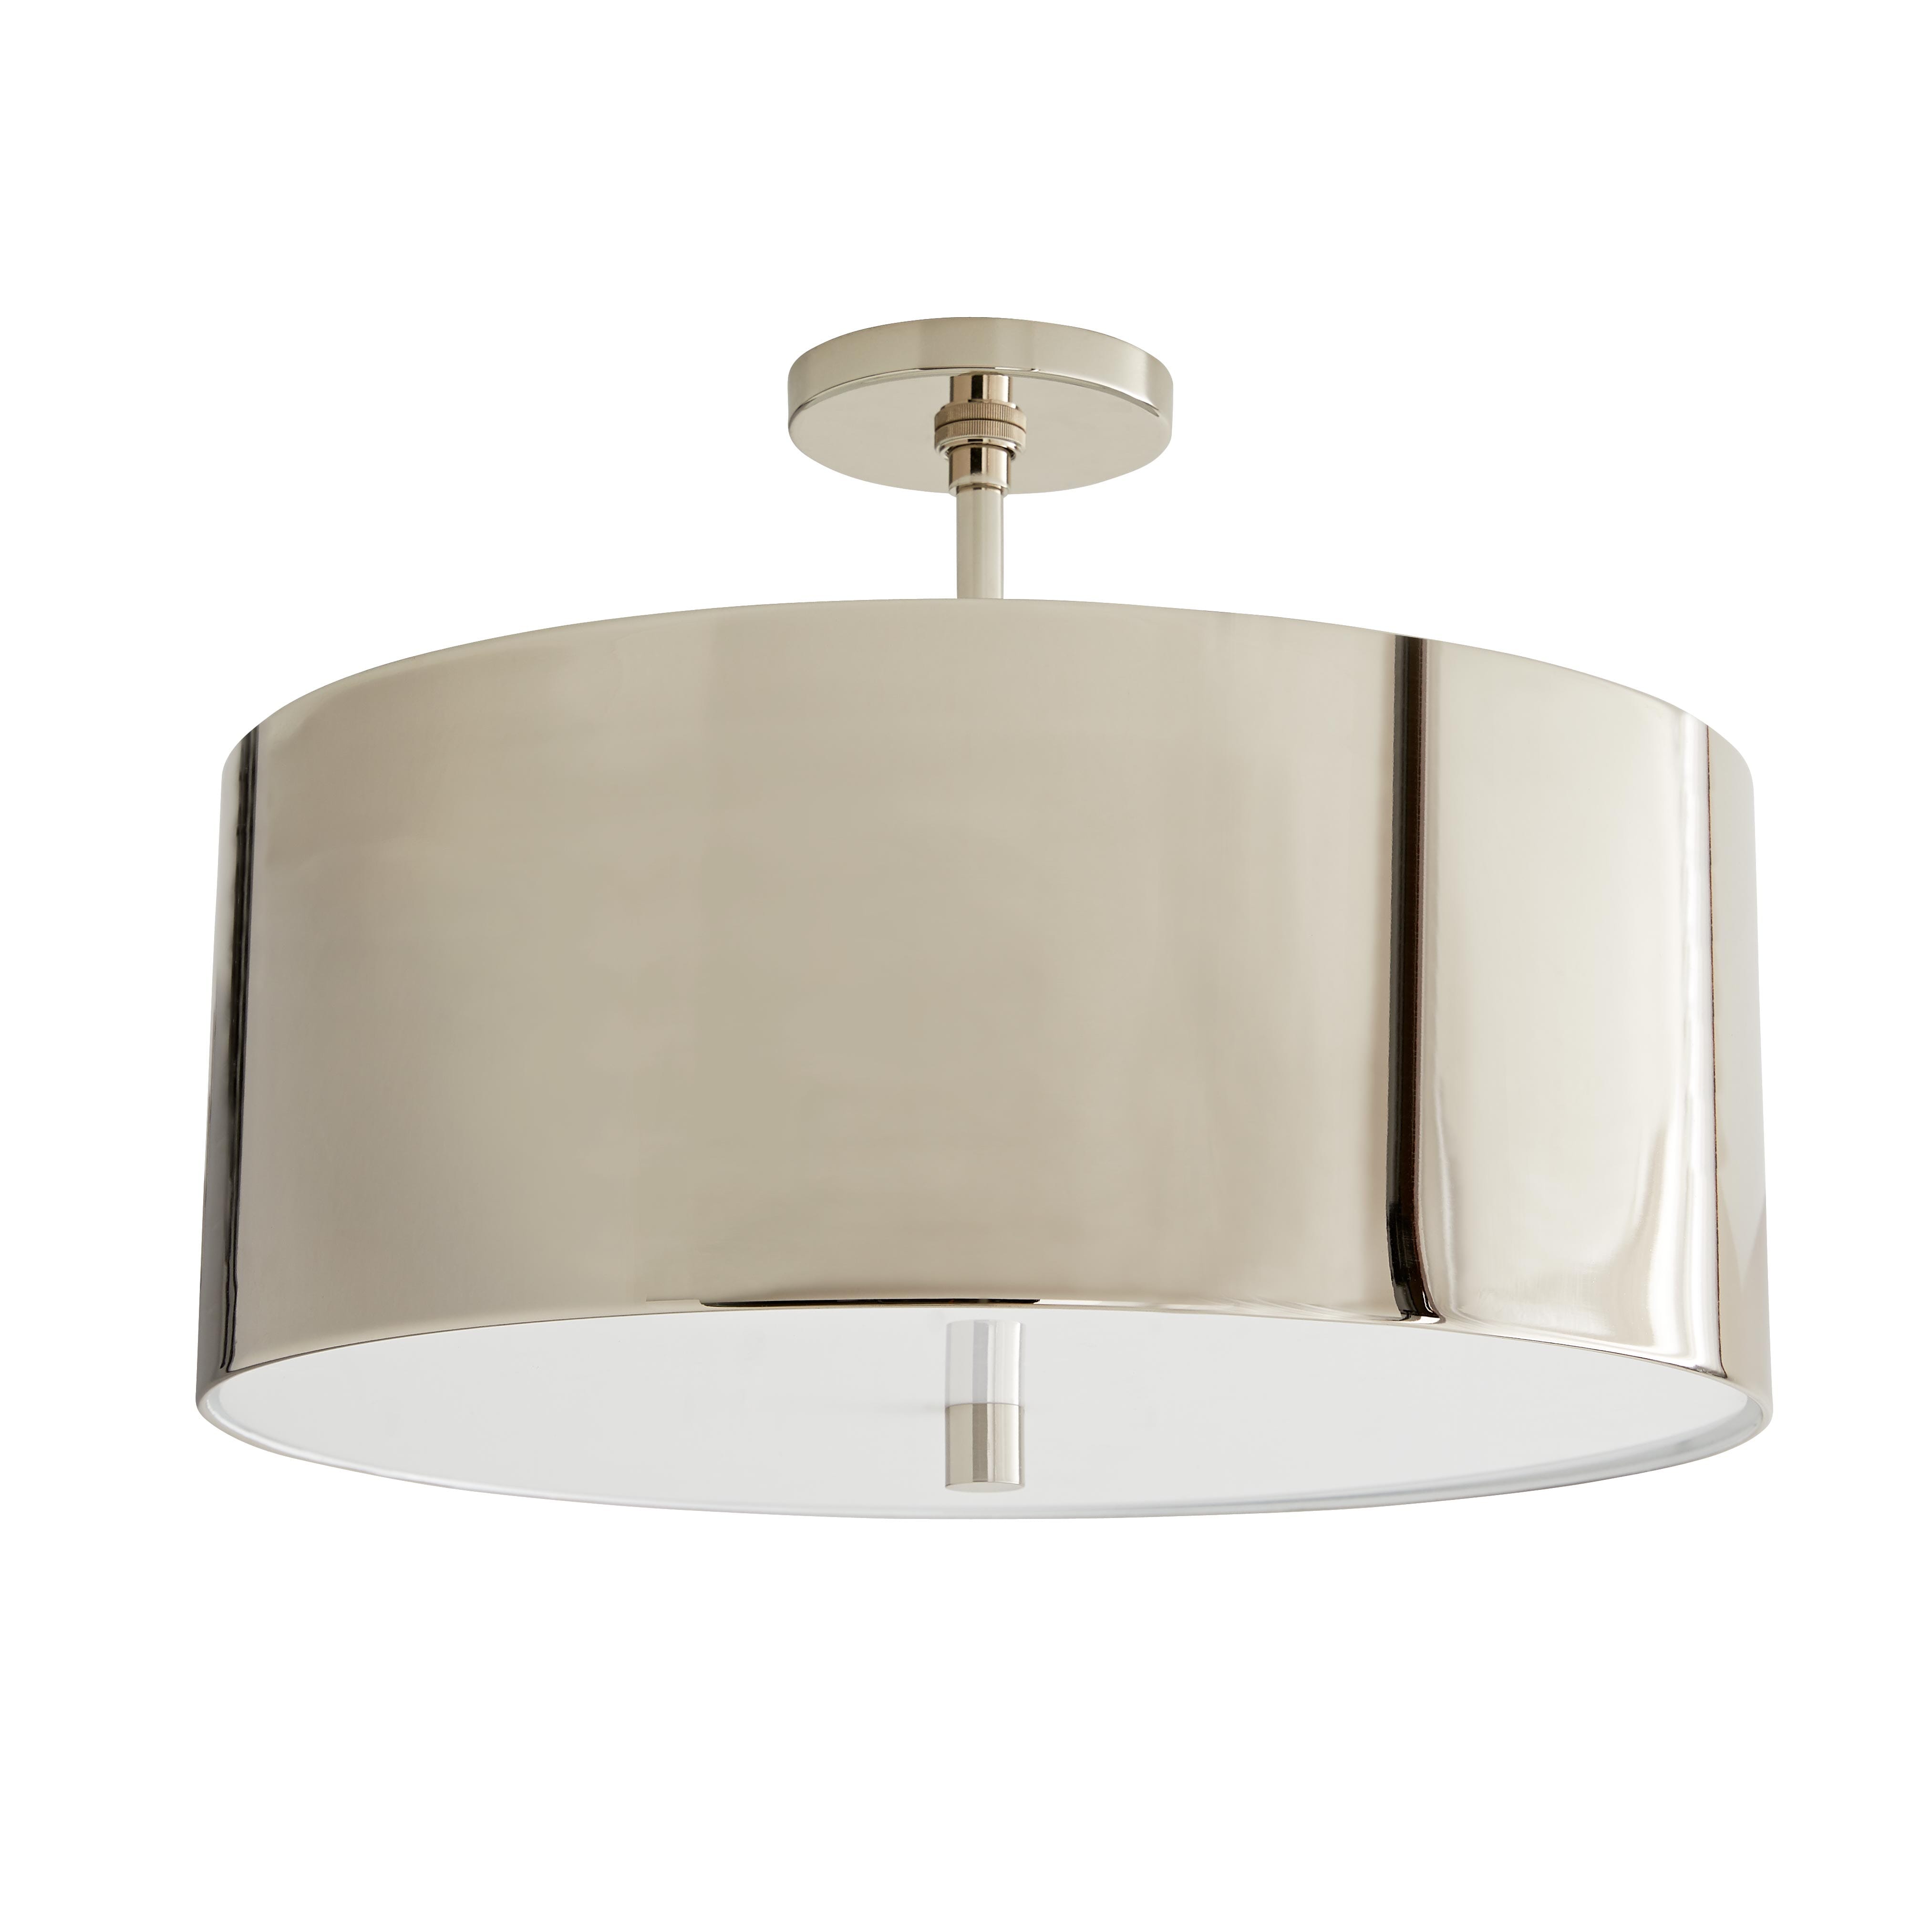 Tarbell Drum Ceiling Light in Polished Nickel